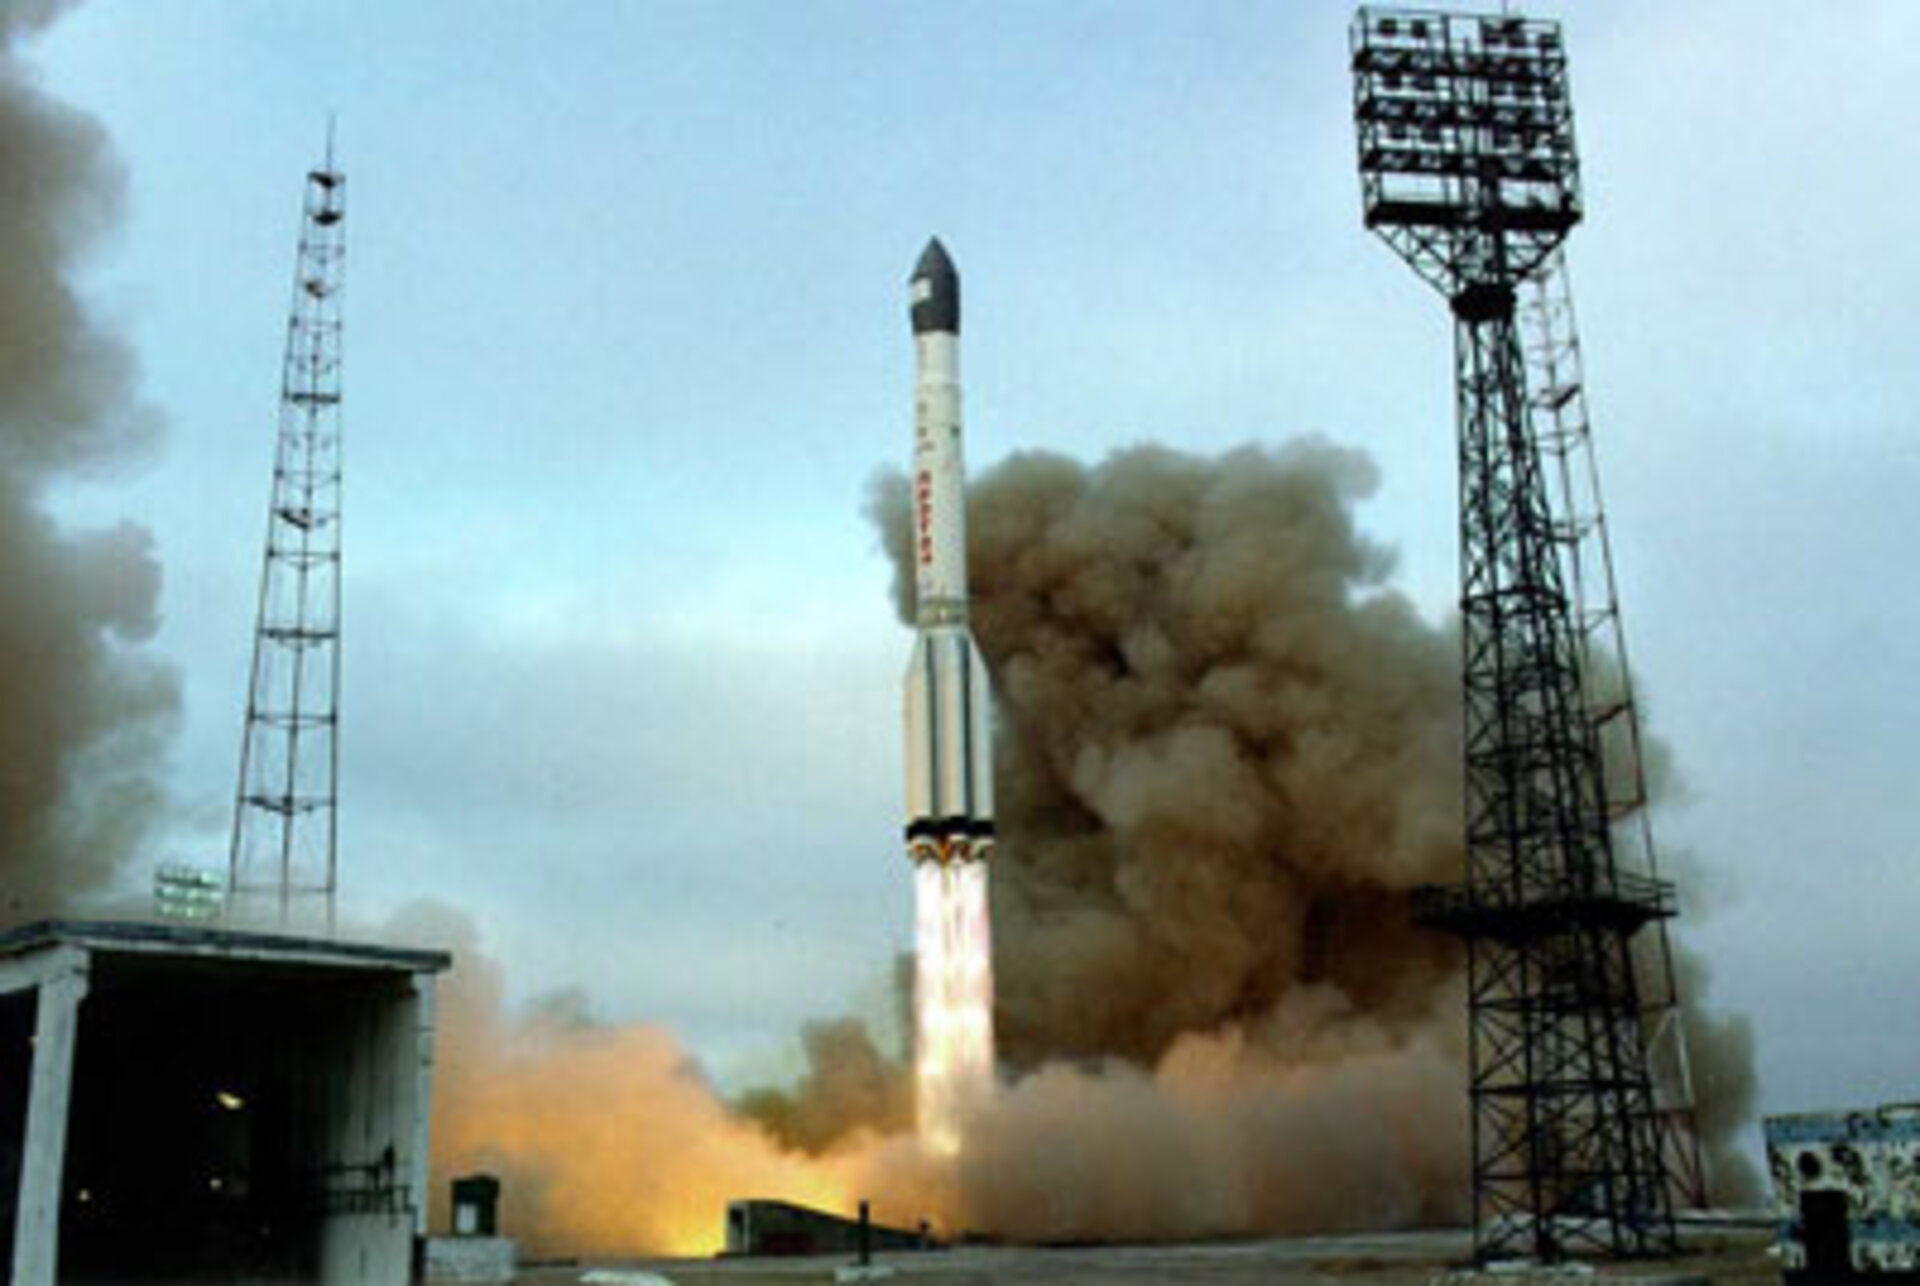 Integral launched on a Russian Proton rocket